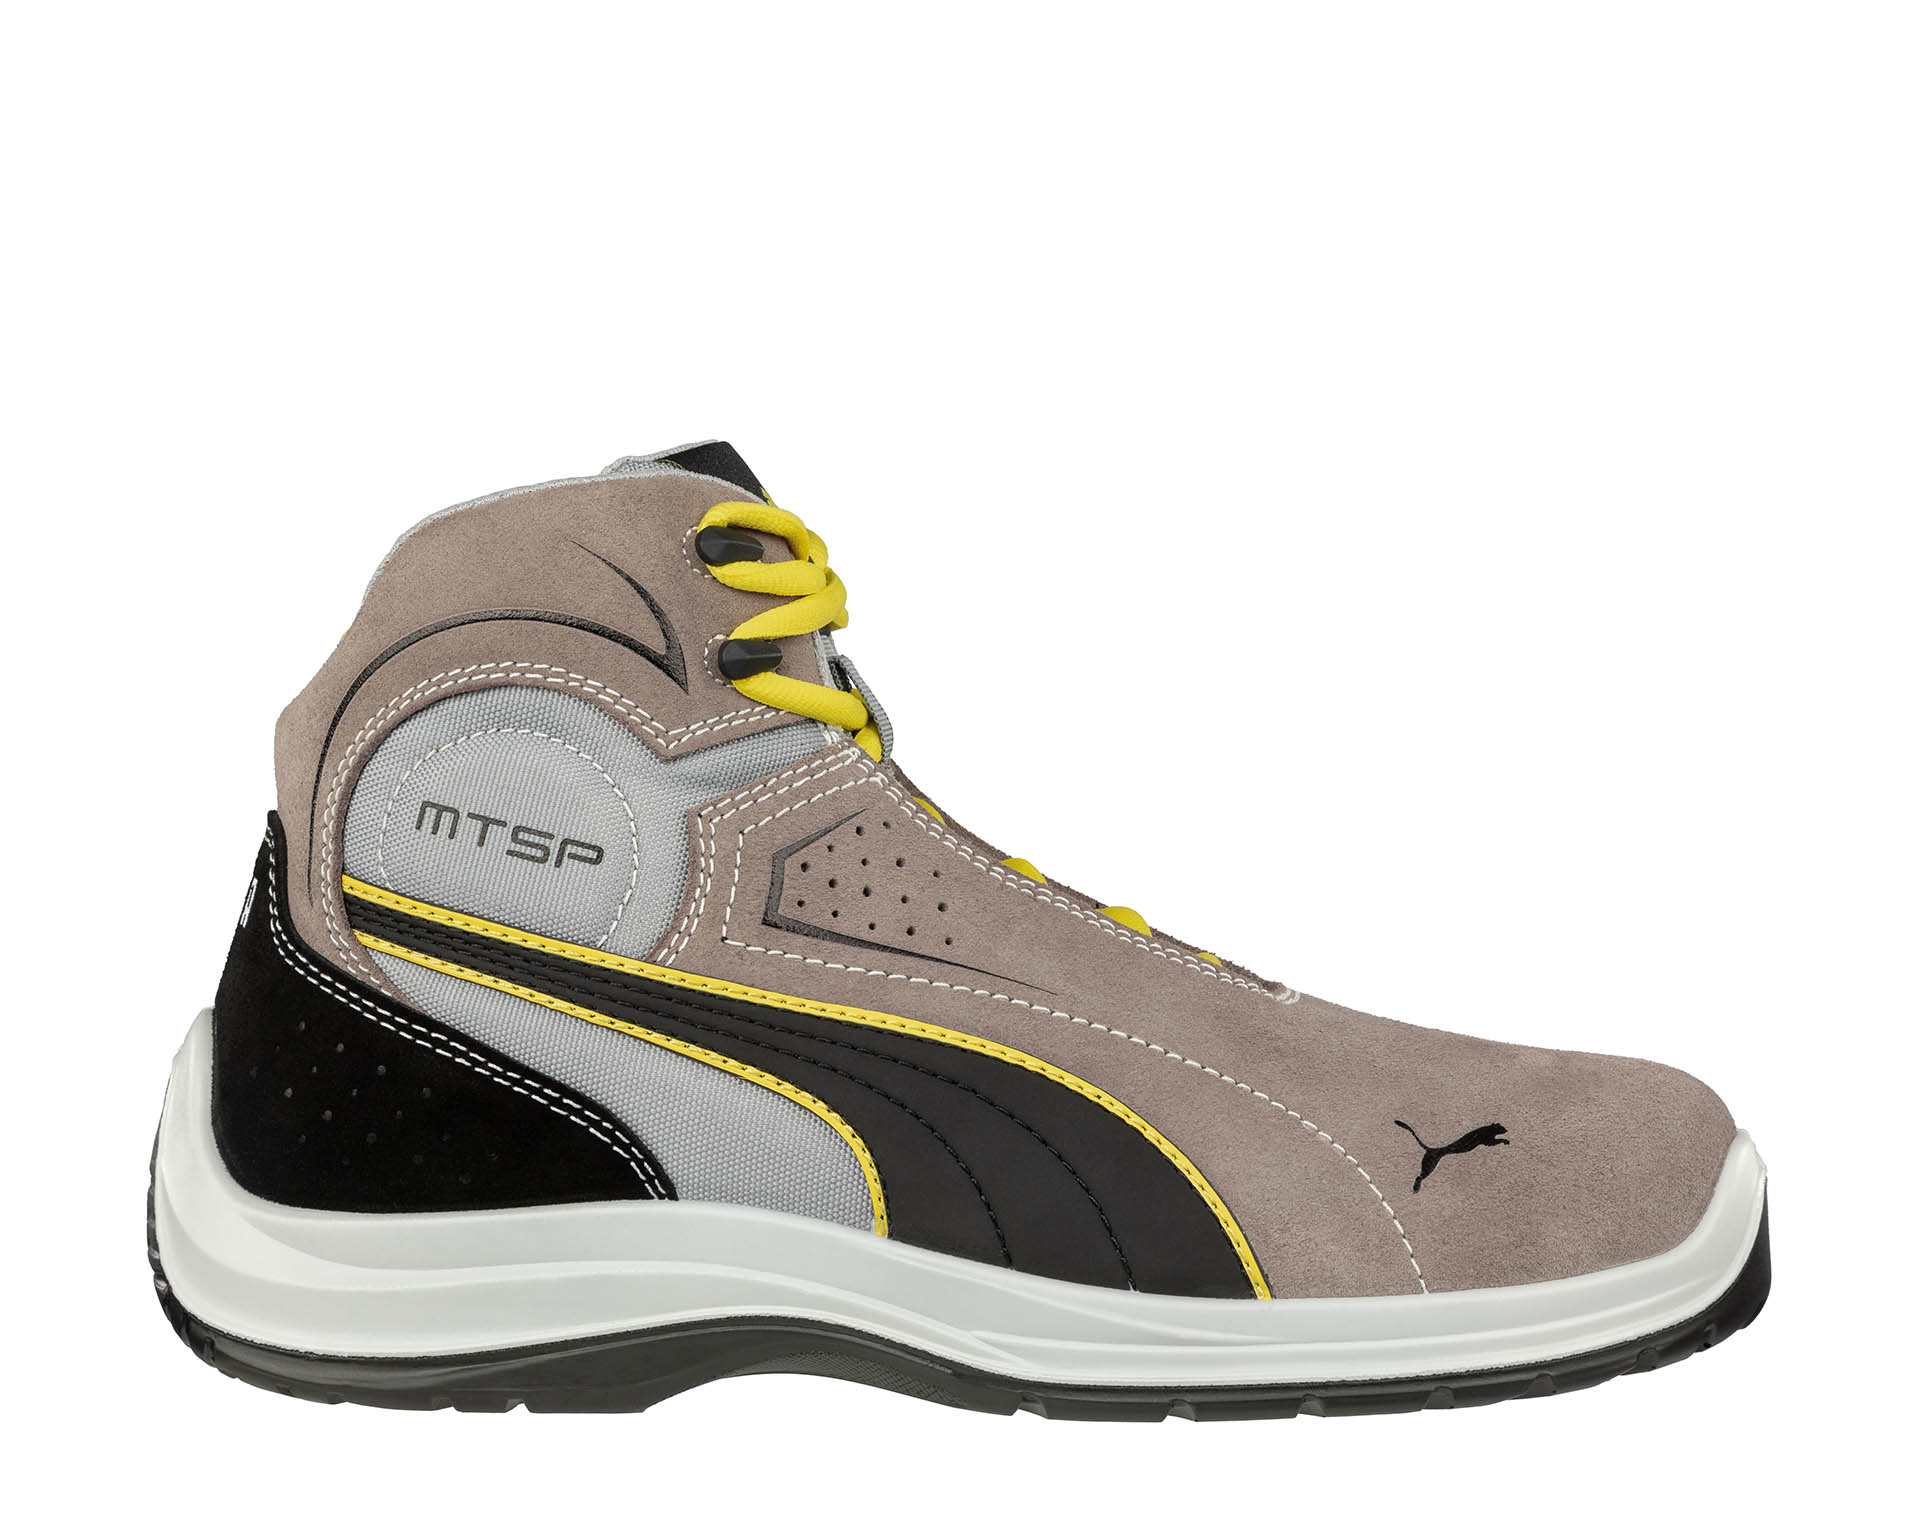 PUMA SAFETY safety SRC English STONE MID Puma shoes TOURING | S3 Safety